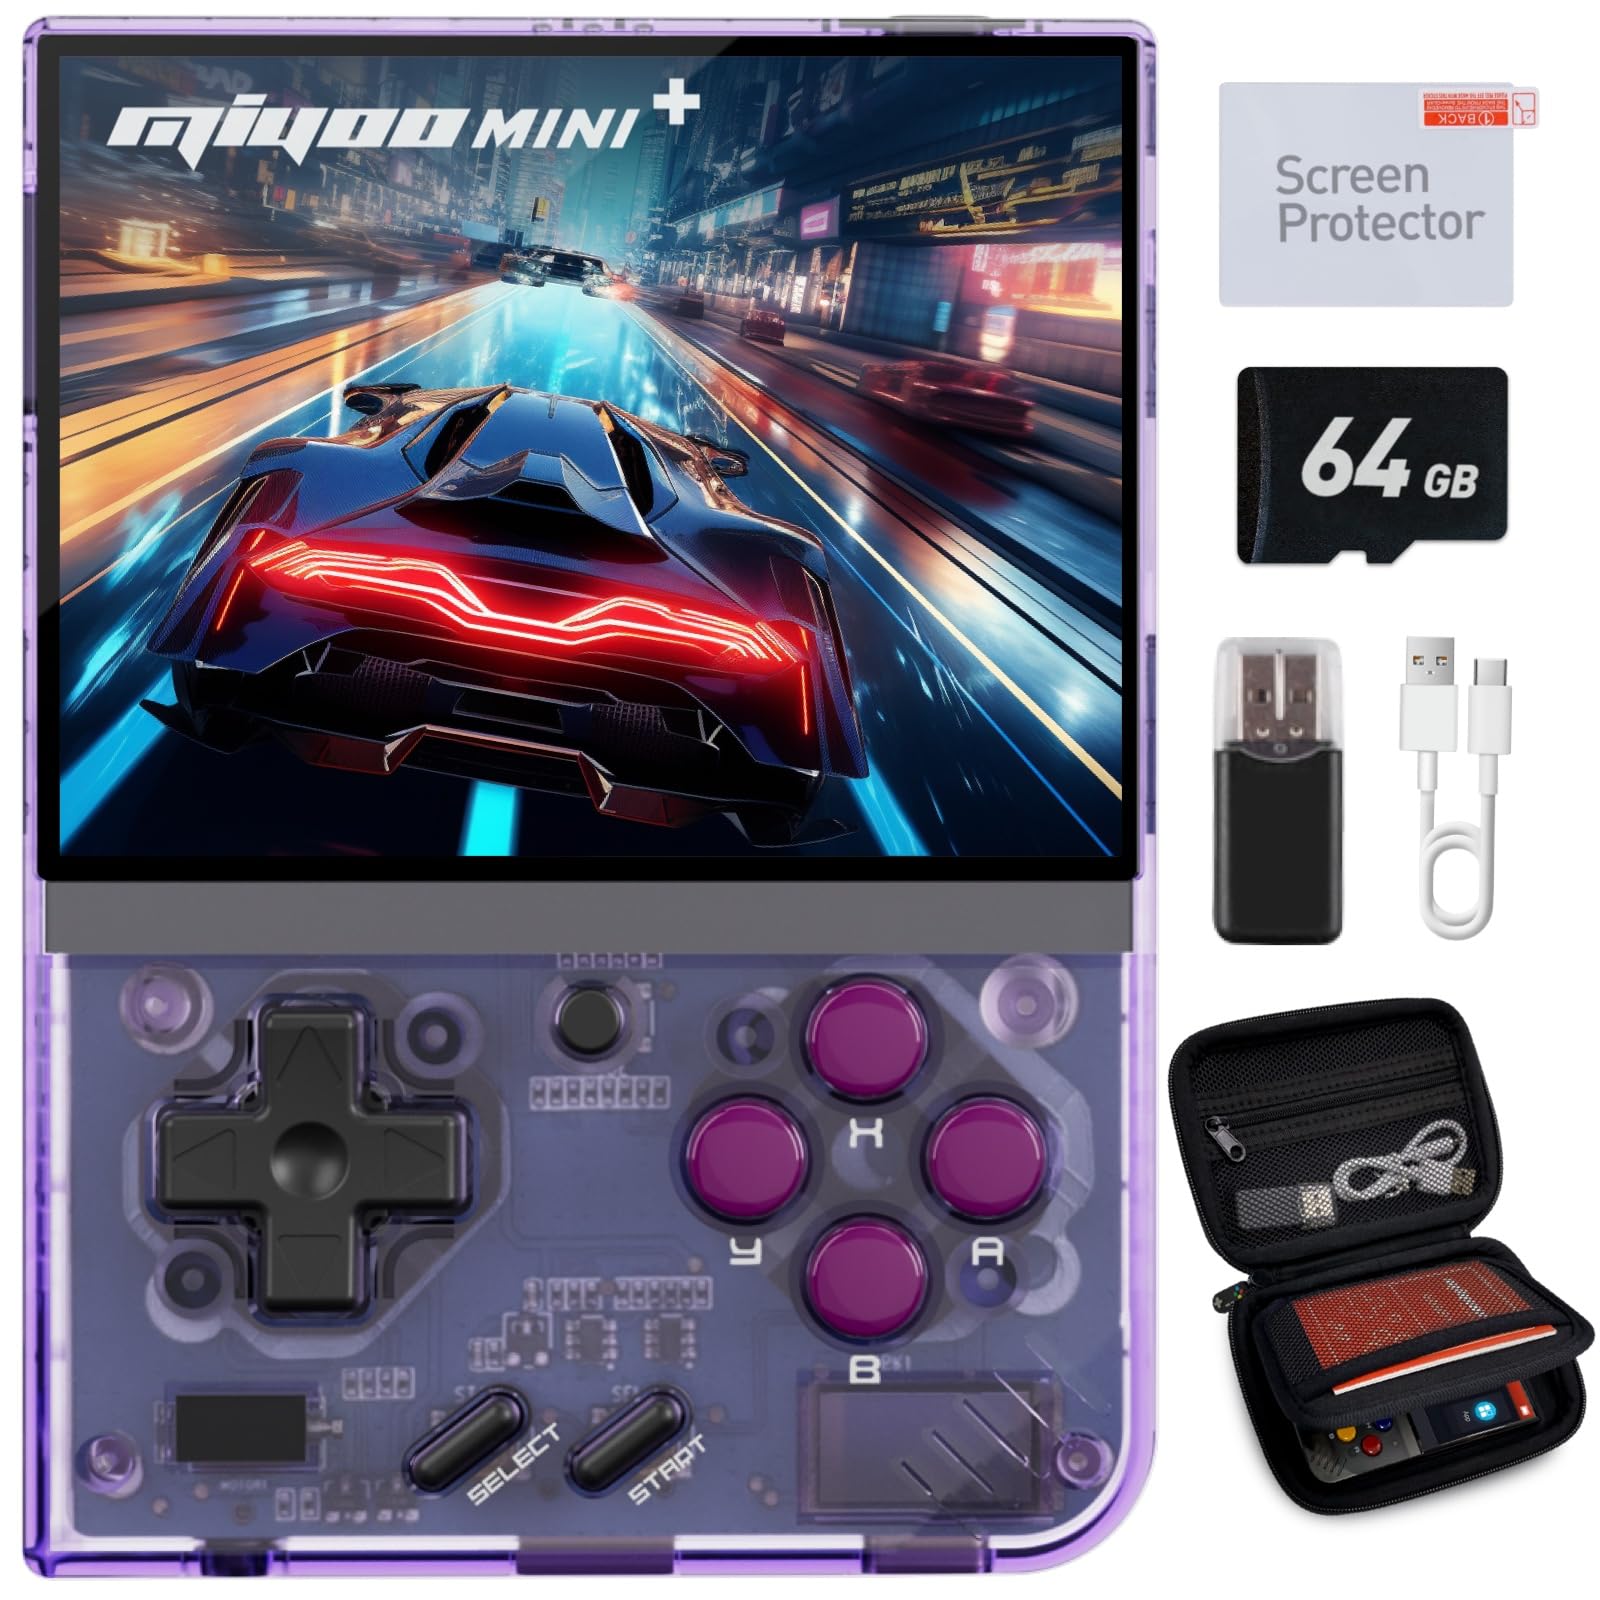 Miyoo Mini Plus Handheld Game Console, with Dedicated Storage Case, 3.5 Inch IPS 640x480 Screen, 64G TF Card with 10,000+ Games, 3000mAh 7+Hours Battery, Support Wireless Network (Purple 64G+Case)